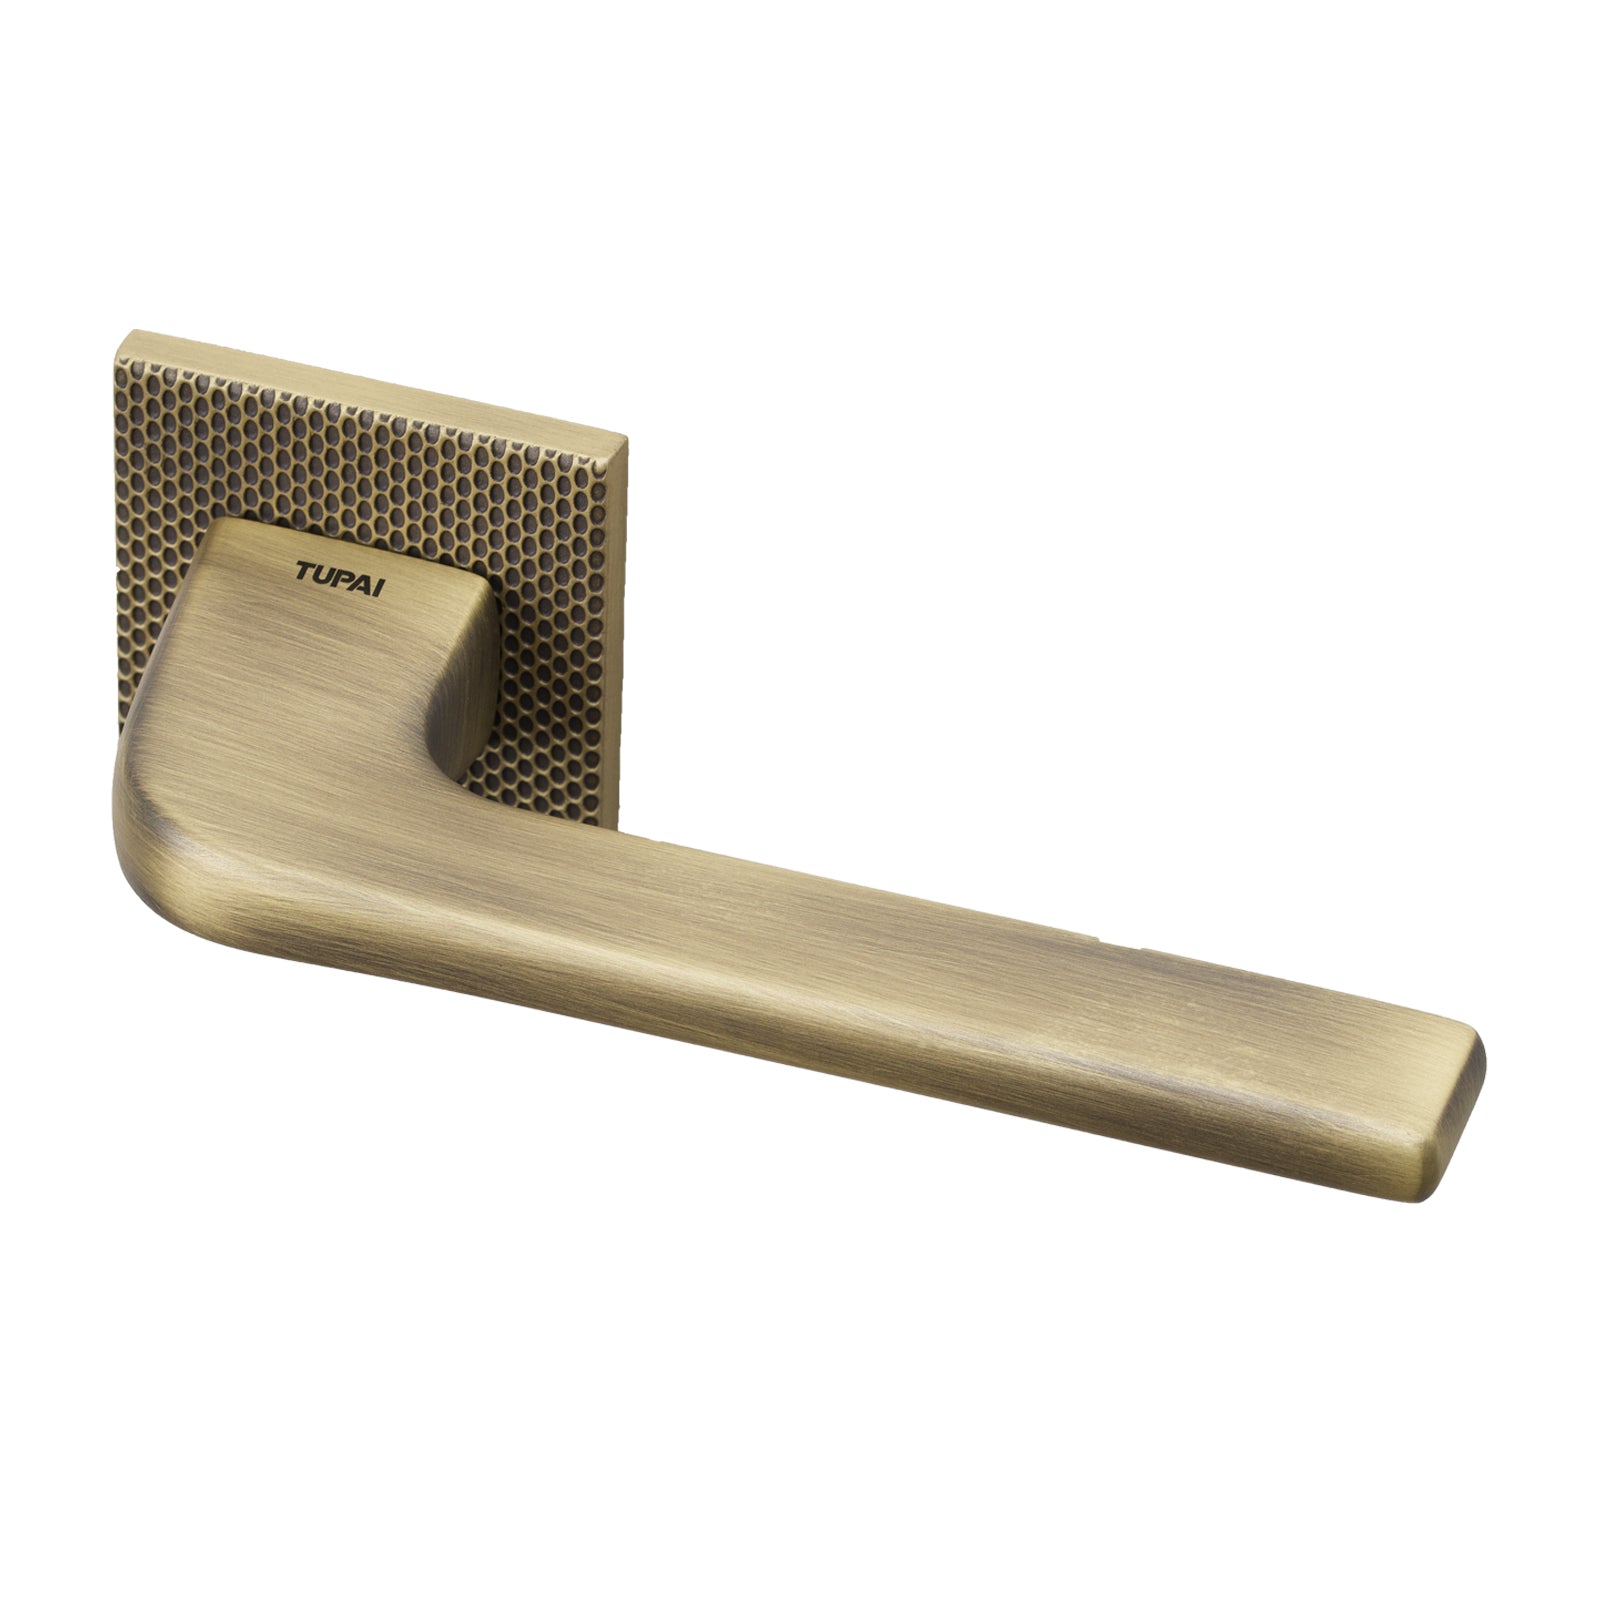 Tupai Perdrada Waterfall texture Lever on Square Rose Door Handle in Antique Brass Finish SHOW